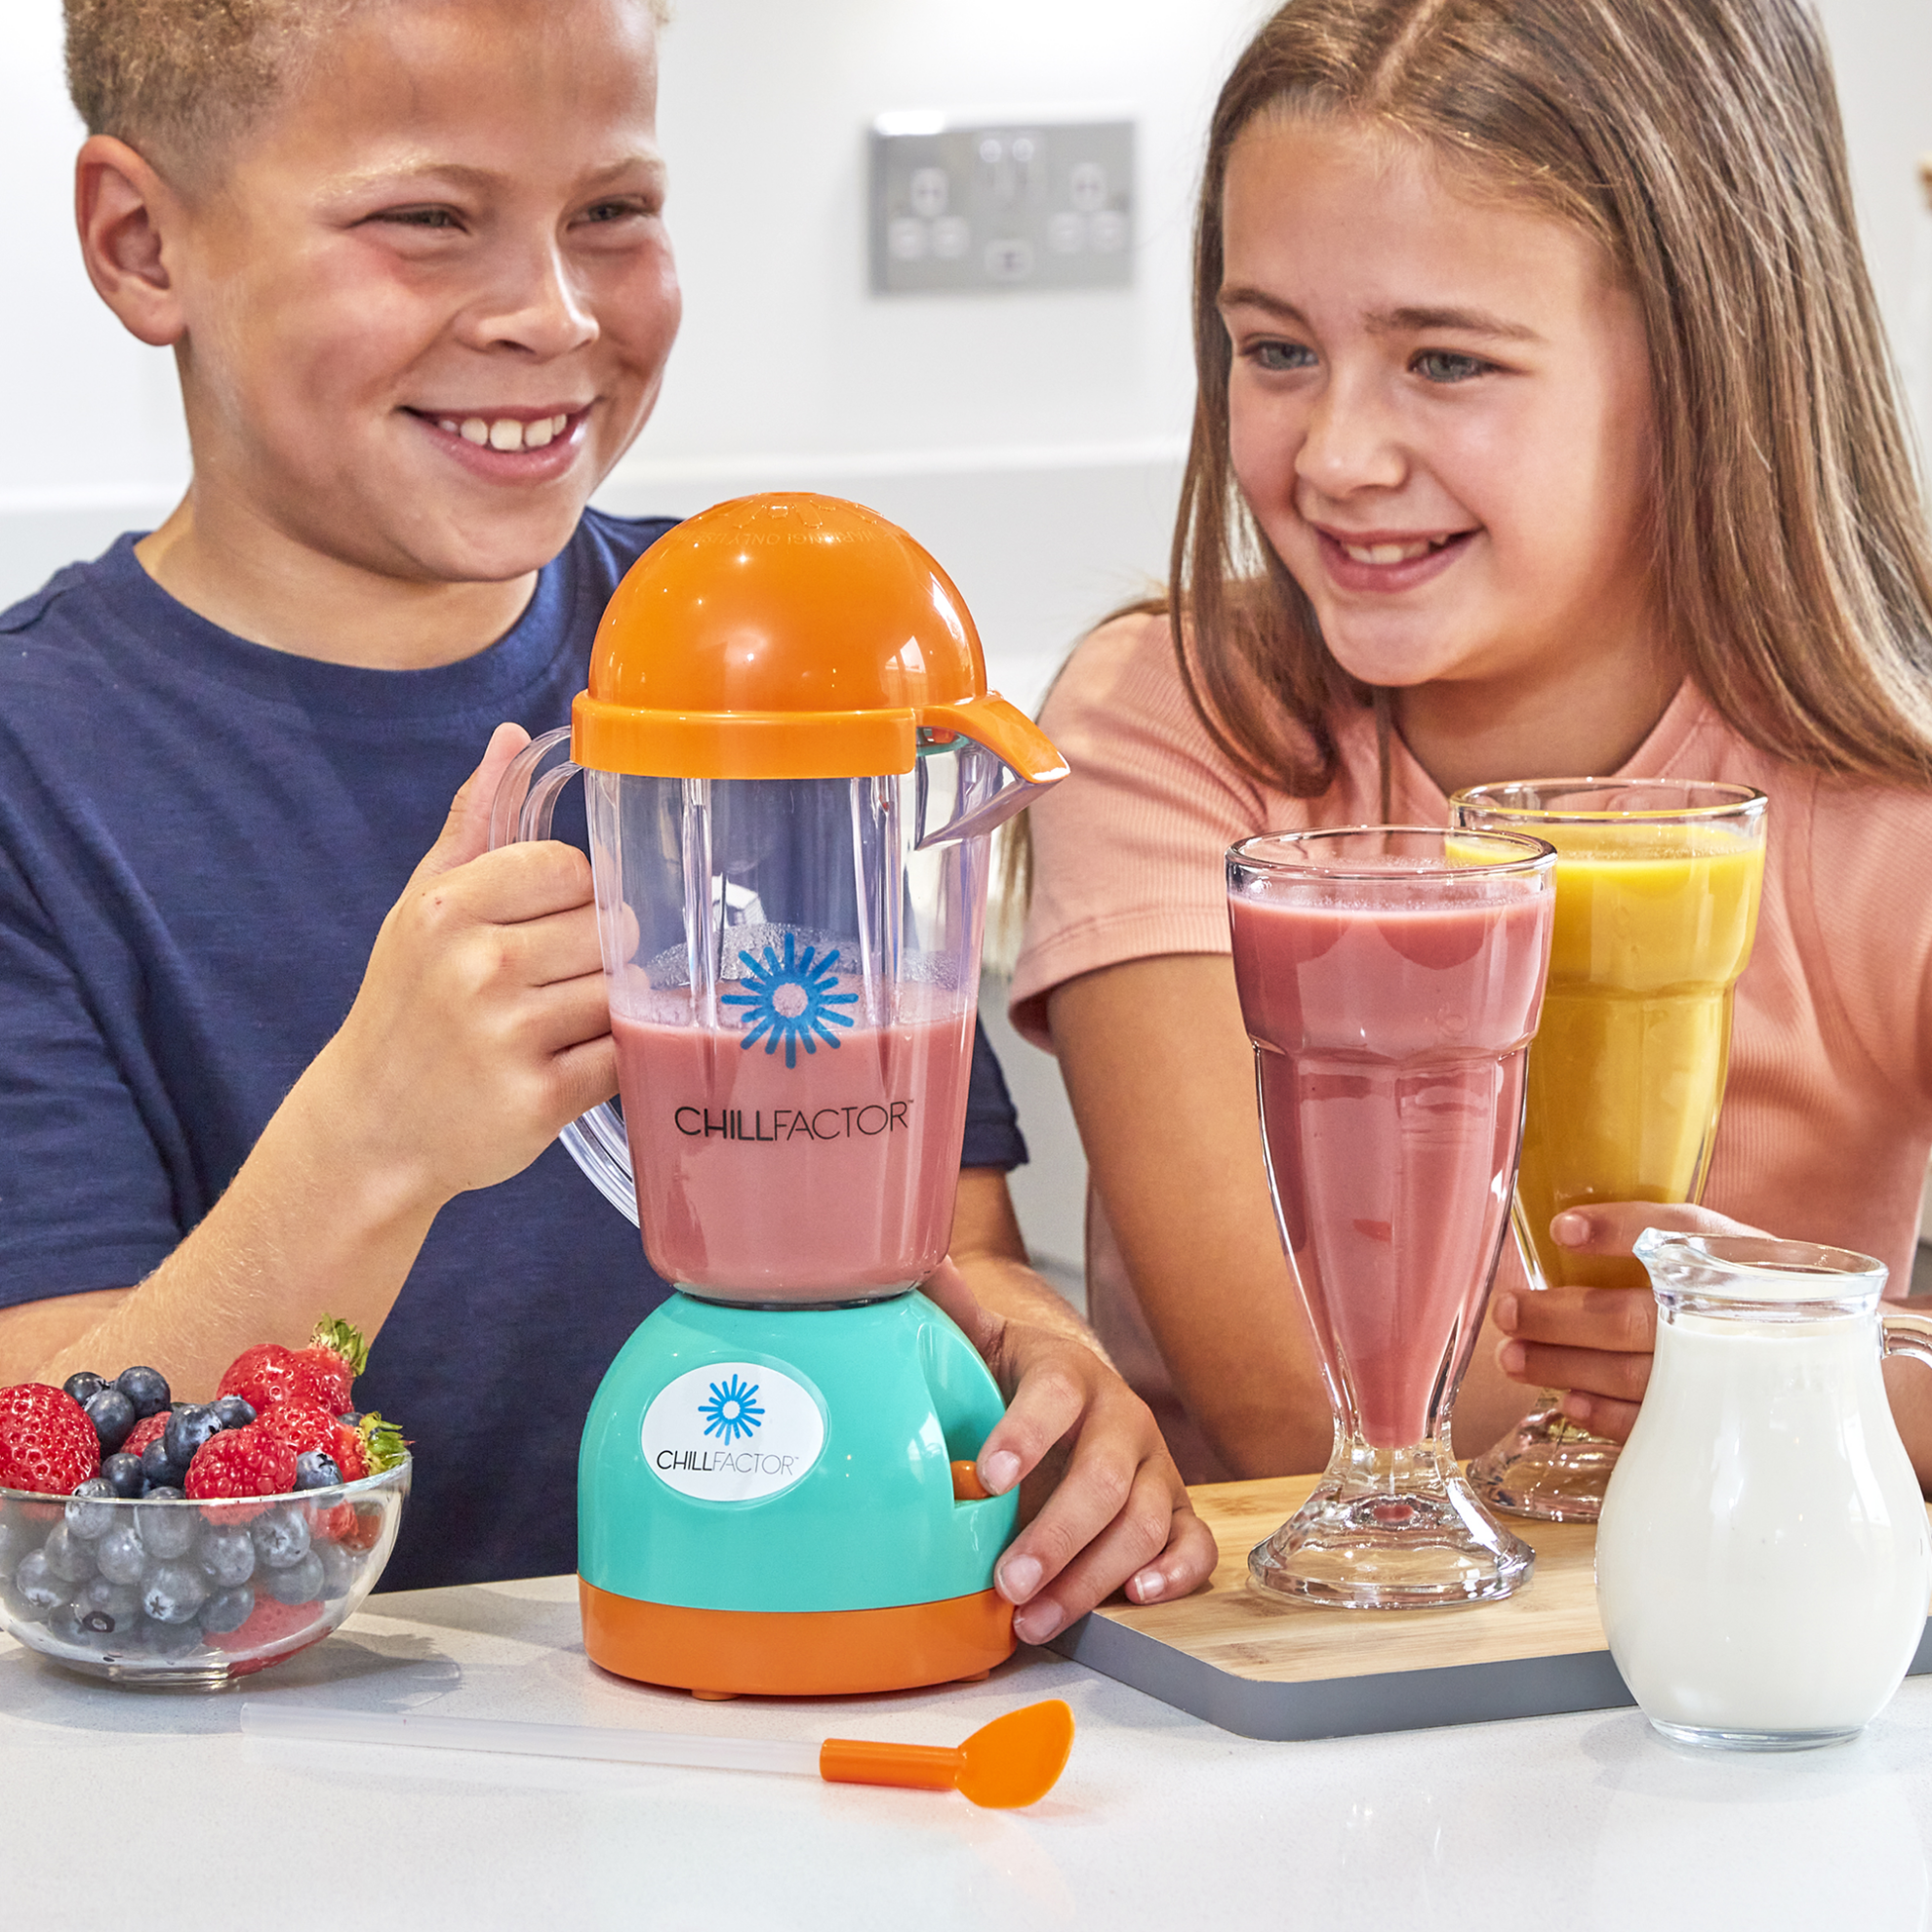 Chill Factor Milkshake and Smoothie Maker Toys from Character